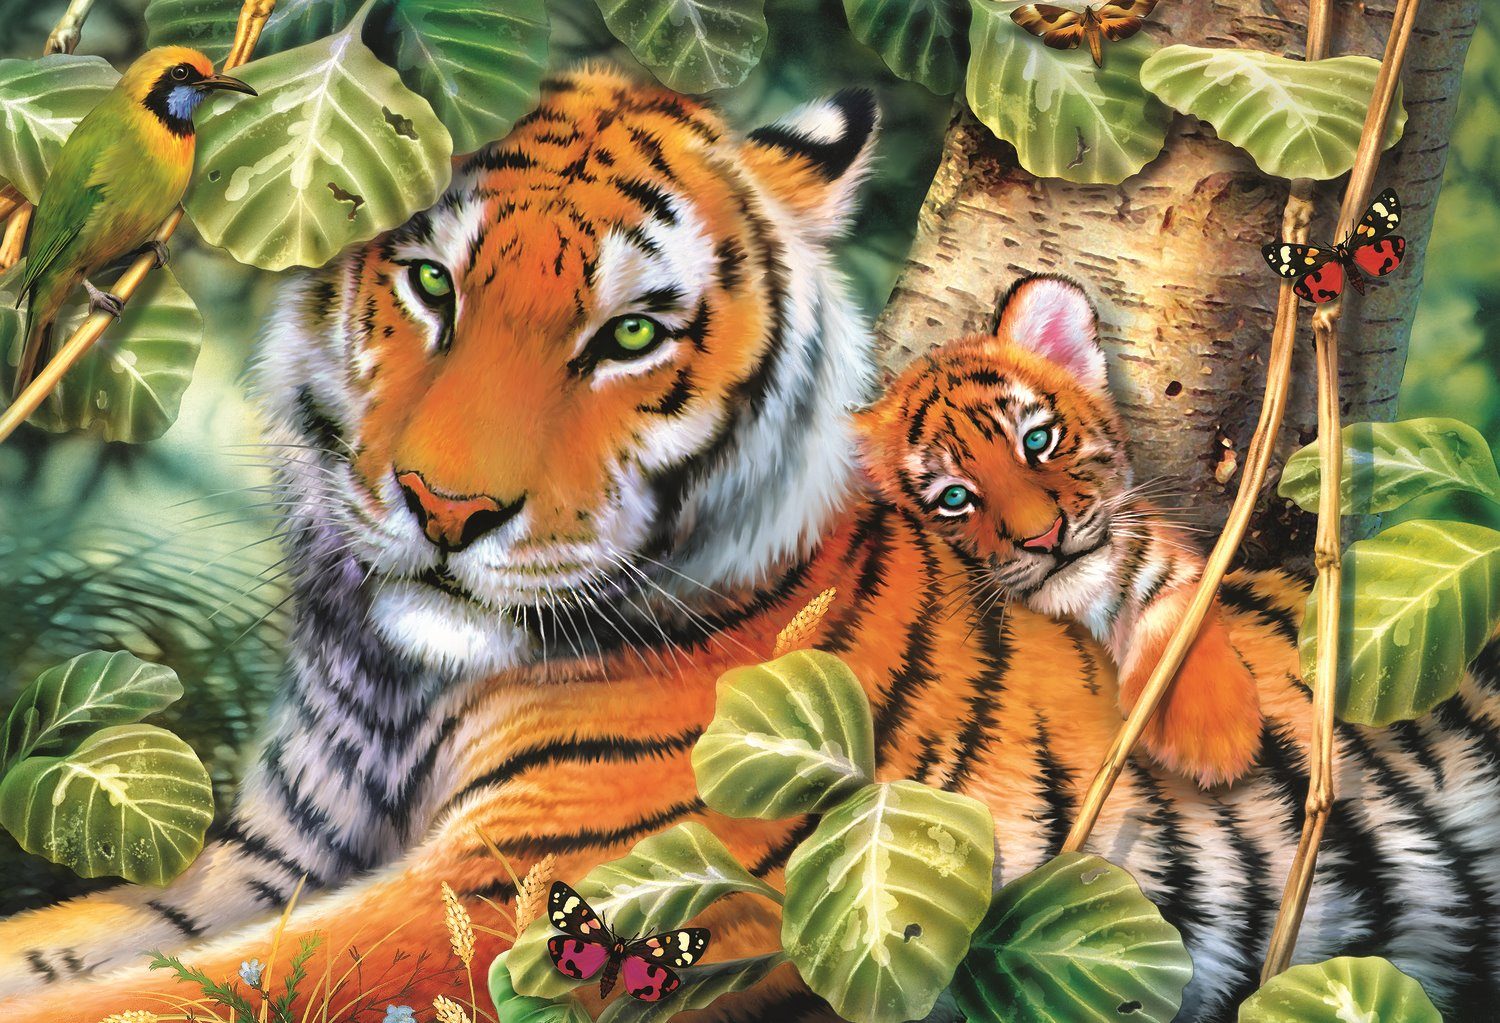 Puzzle Two Tigers